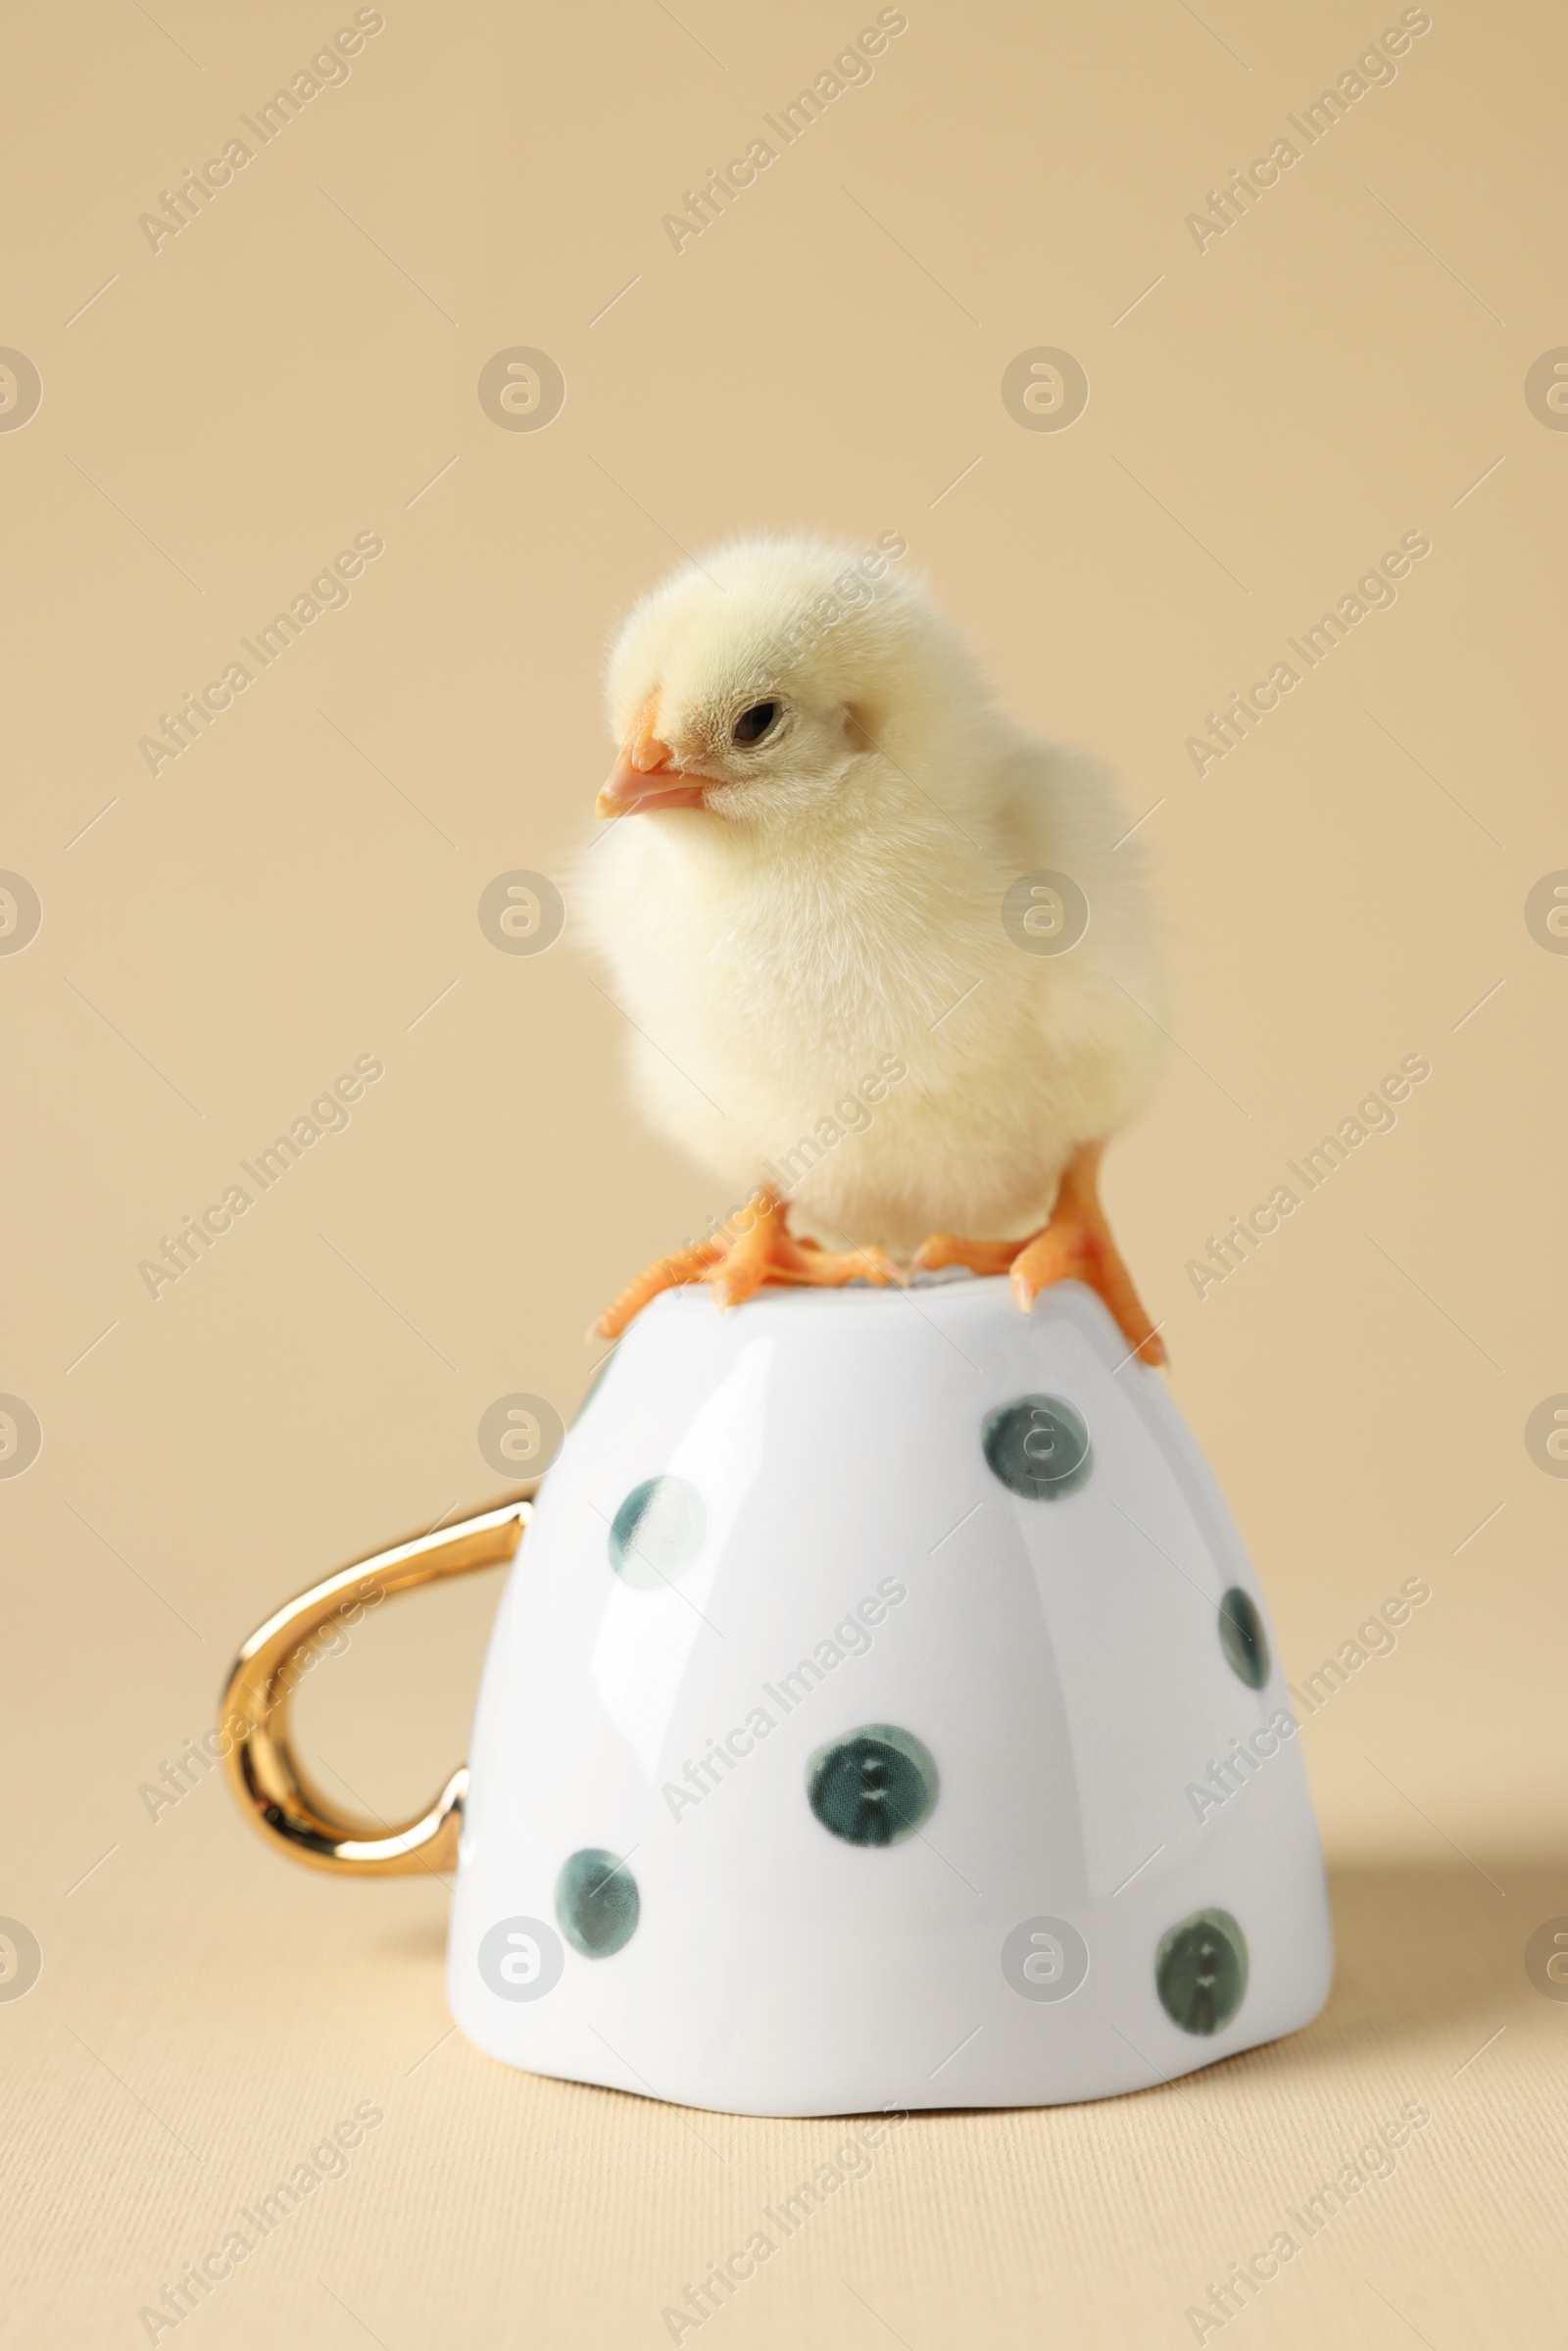 Photo of Cute chick on cup against beige background, closeup. Baby animal